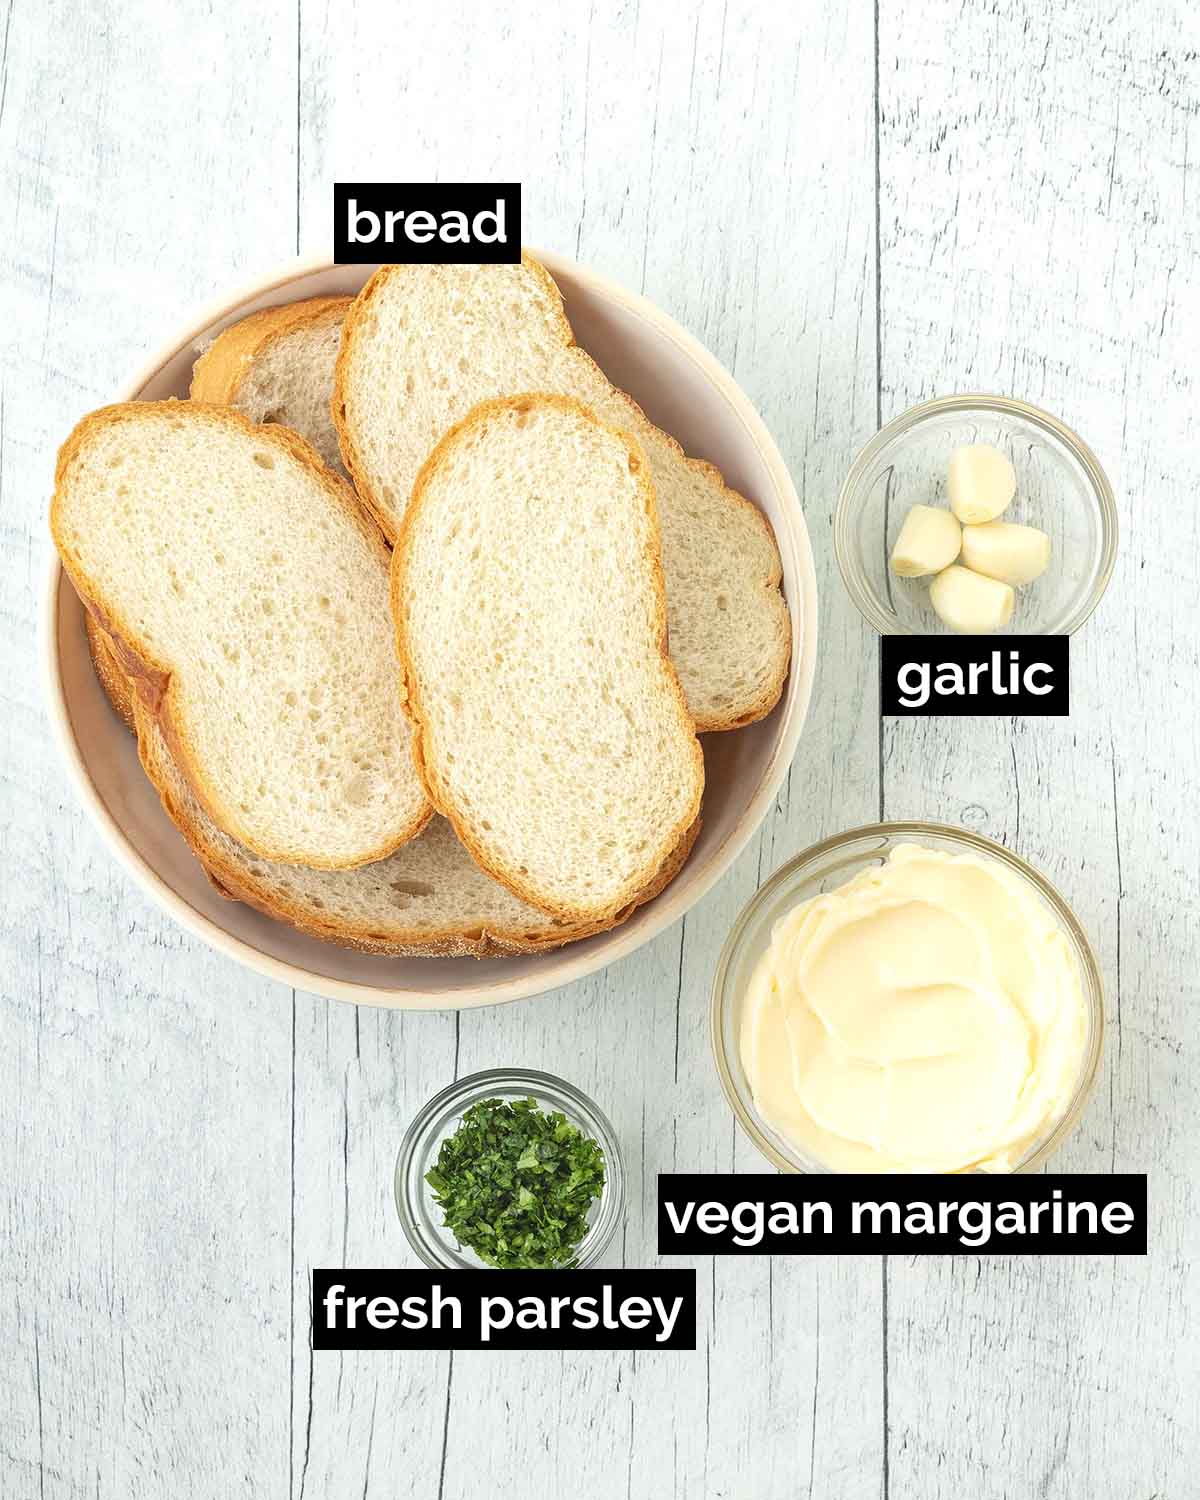 An overhead image showing the ingredients needed to make vegan garlic bread.